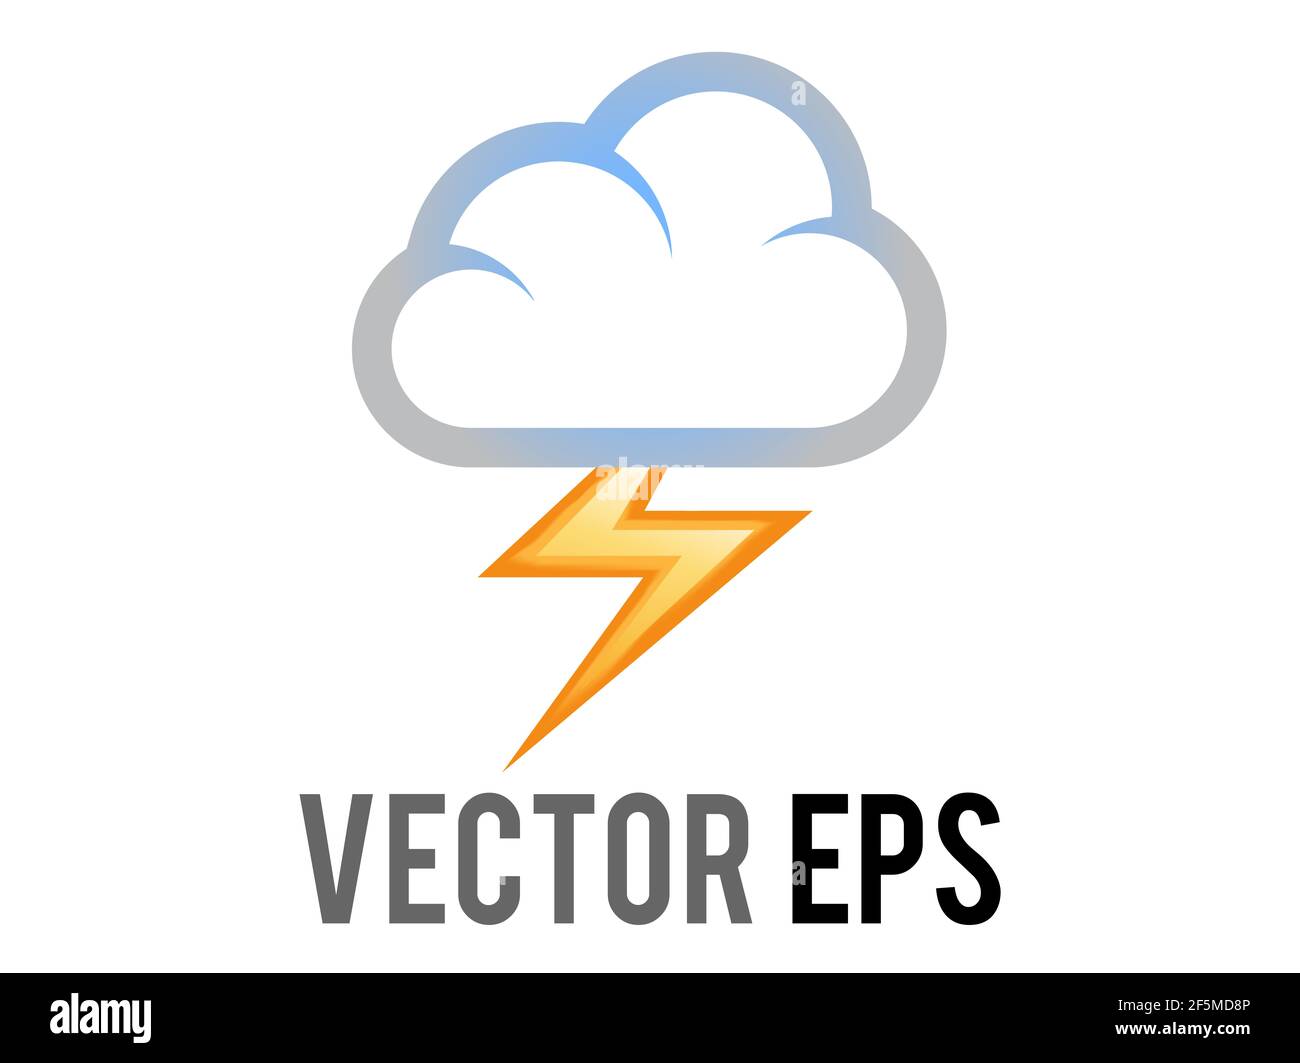 The isolated vector white thunderstorms cloud icon with yellow lightning bolt flashing from thundercloud Stock Photo